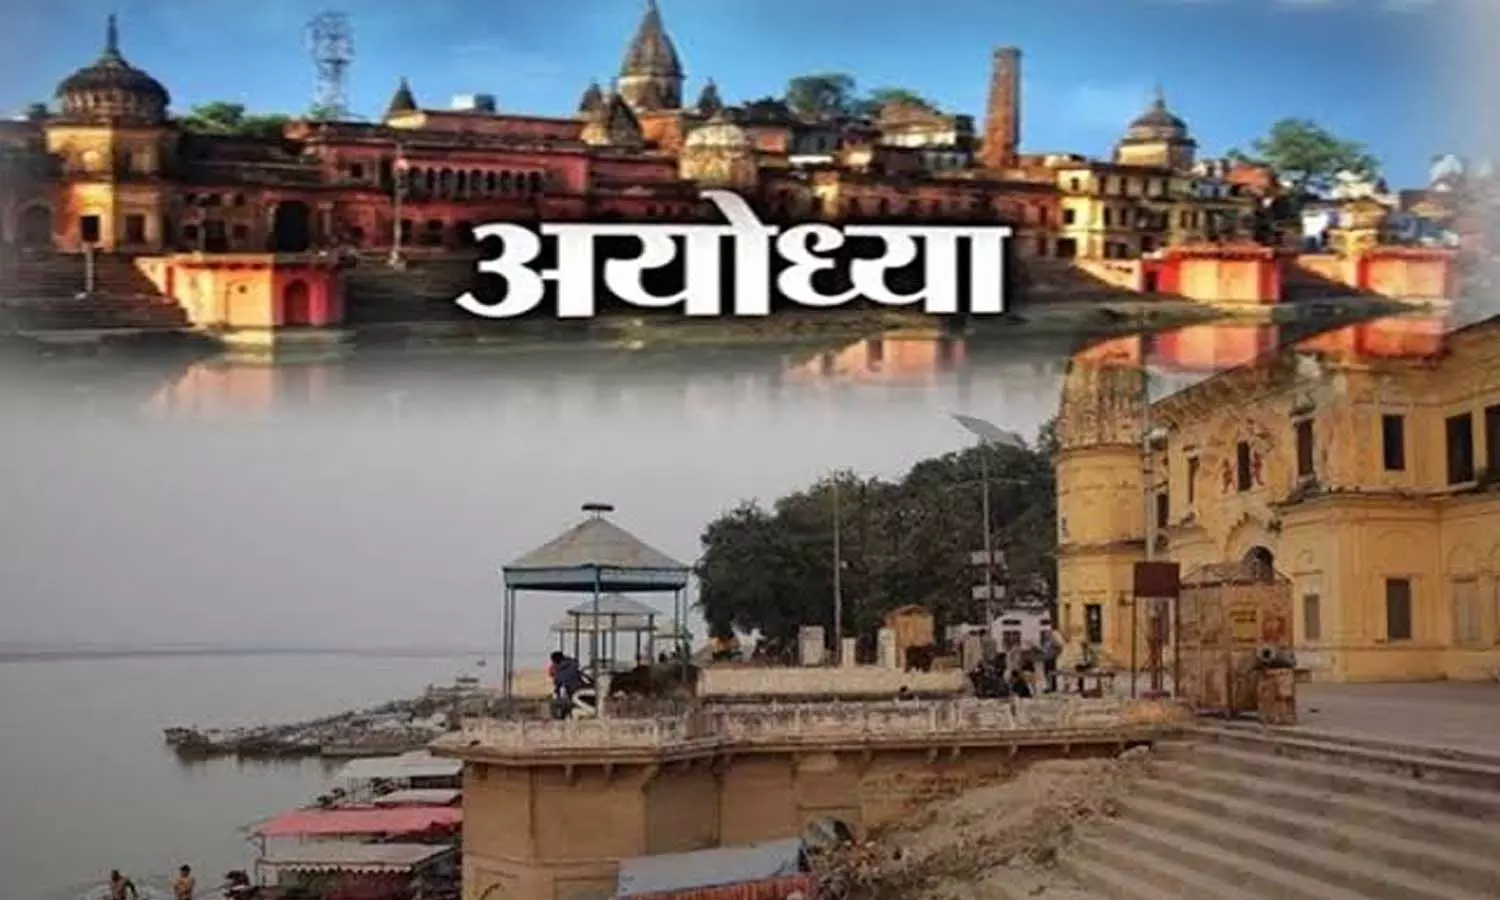 Ayodhya: The doors of the temples were closed, the Sutak period of the lunar eclipse started